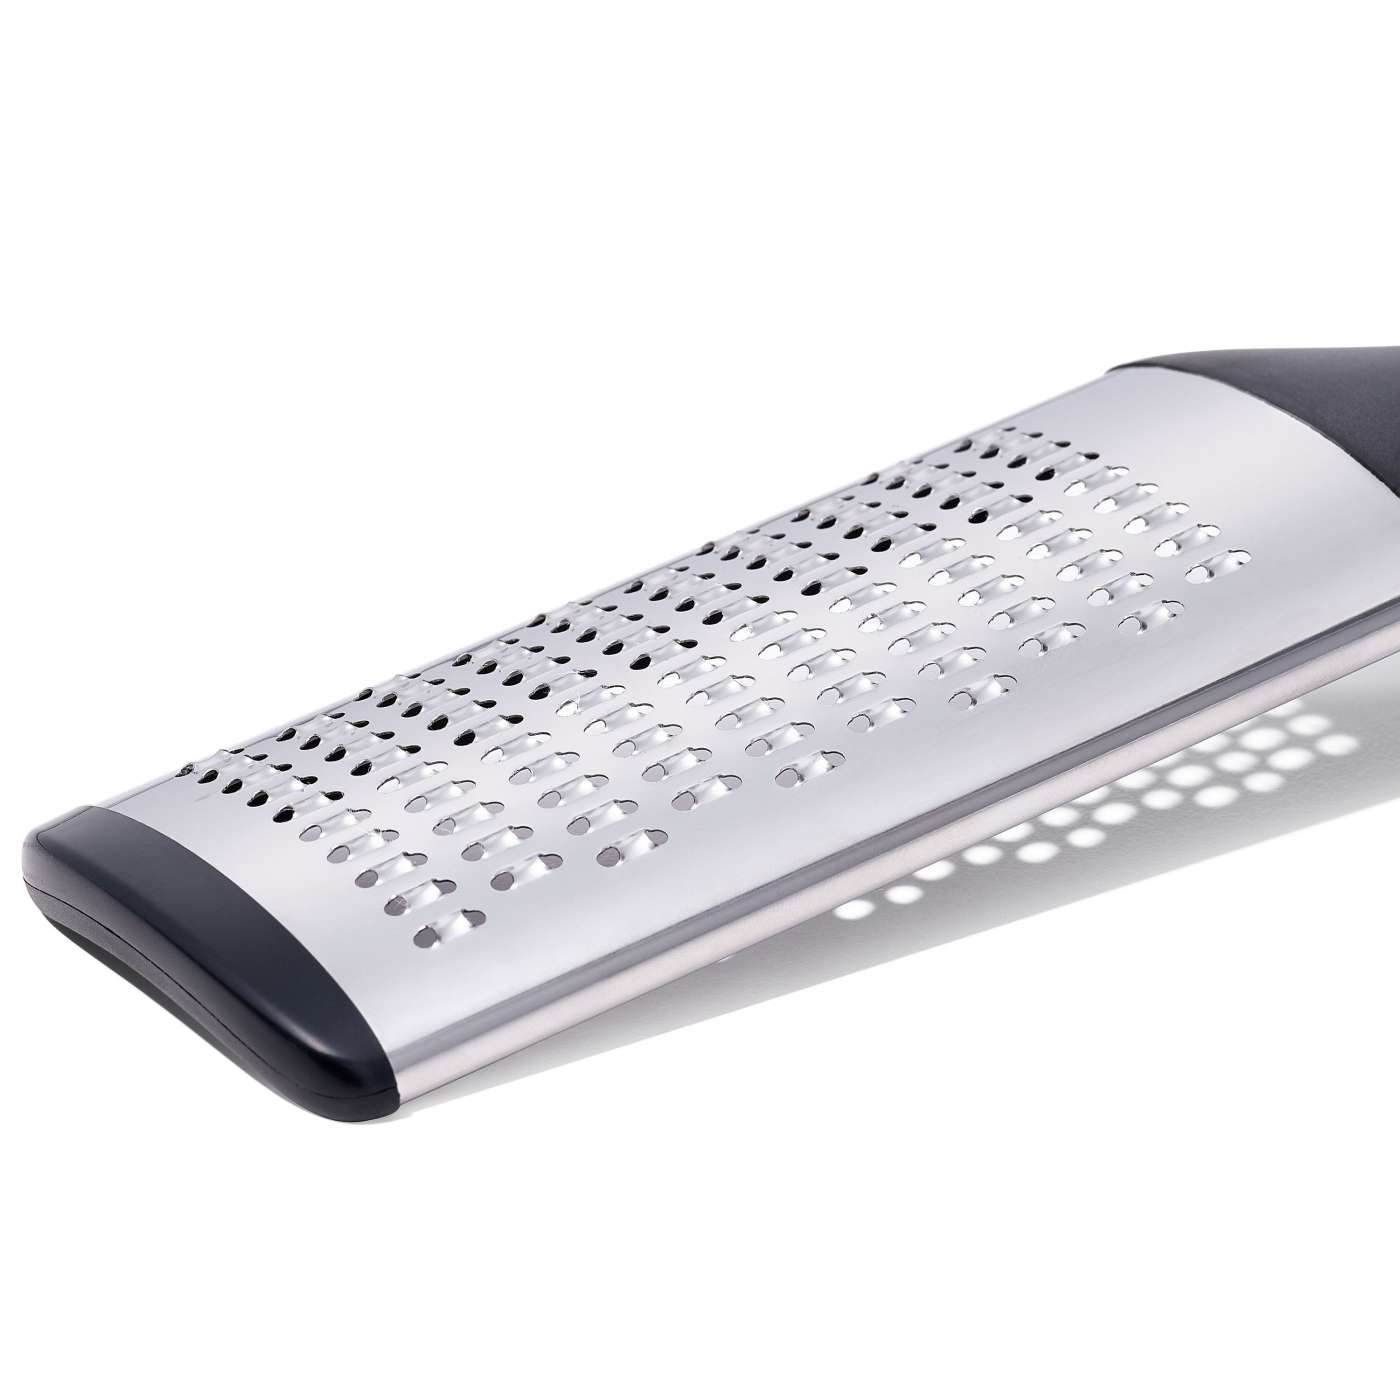  OXO Good Grips Rotary Grater,White: Home & Kitchen